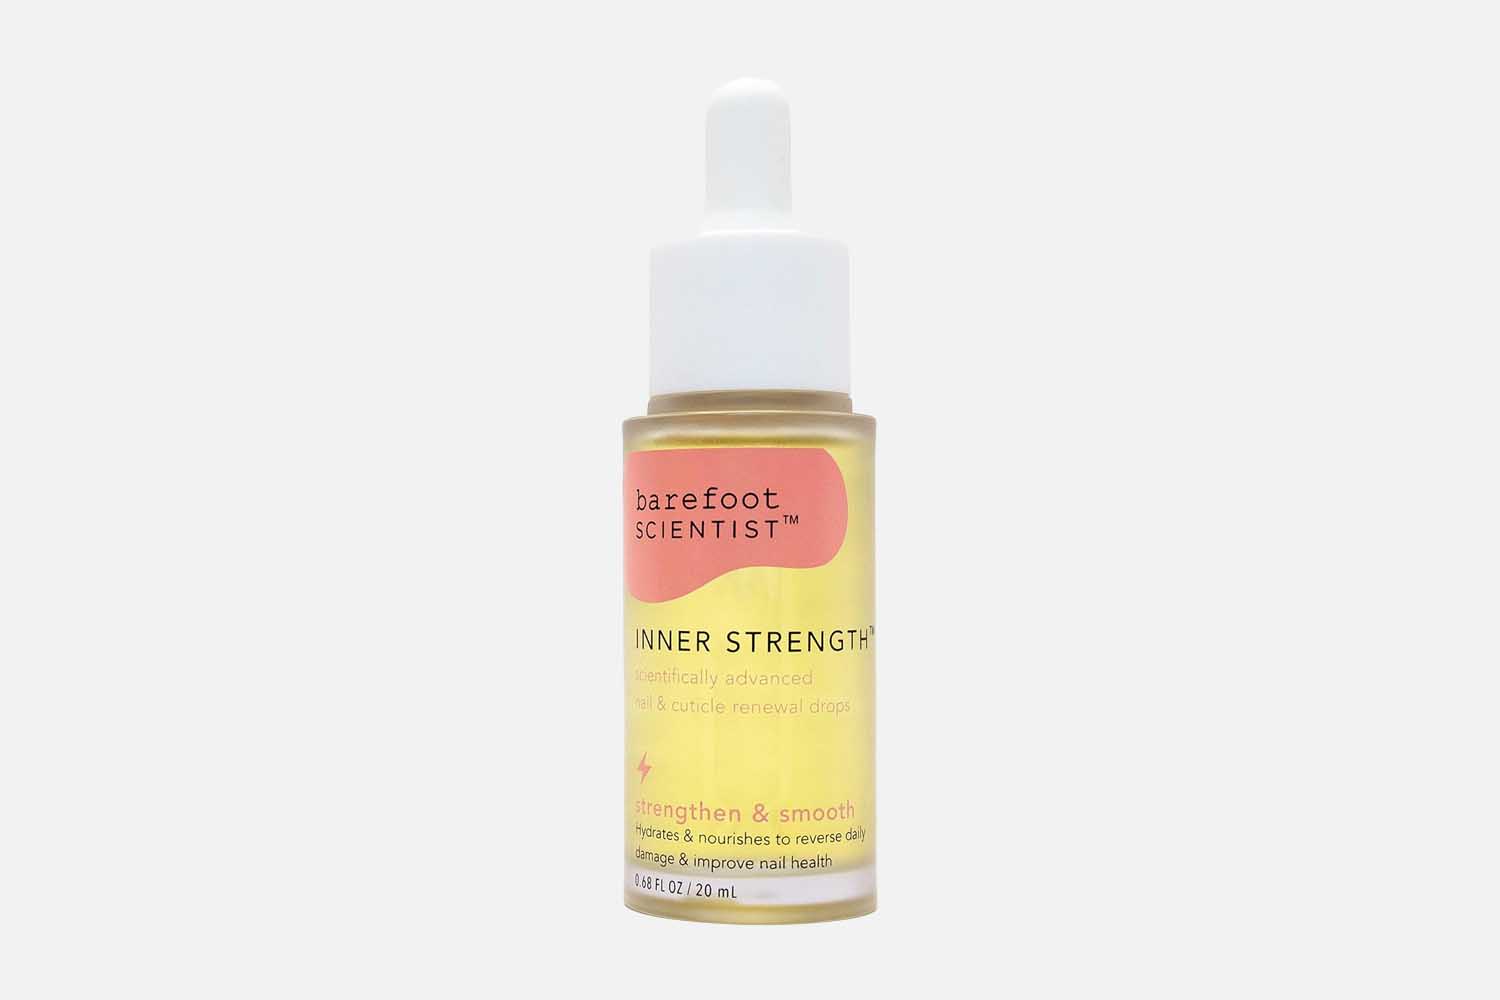 Barefoot Scientist Inner Strength Nail and Cuticle Renewal Drops